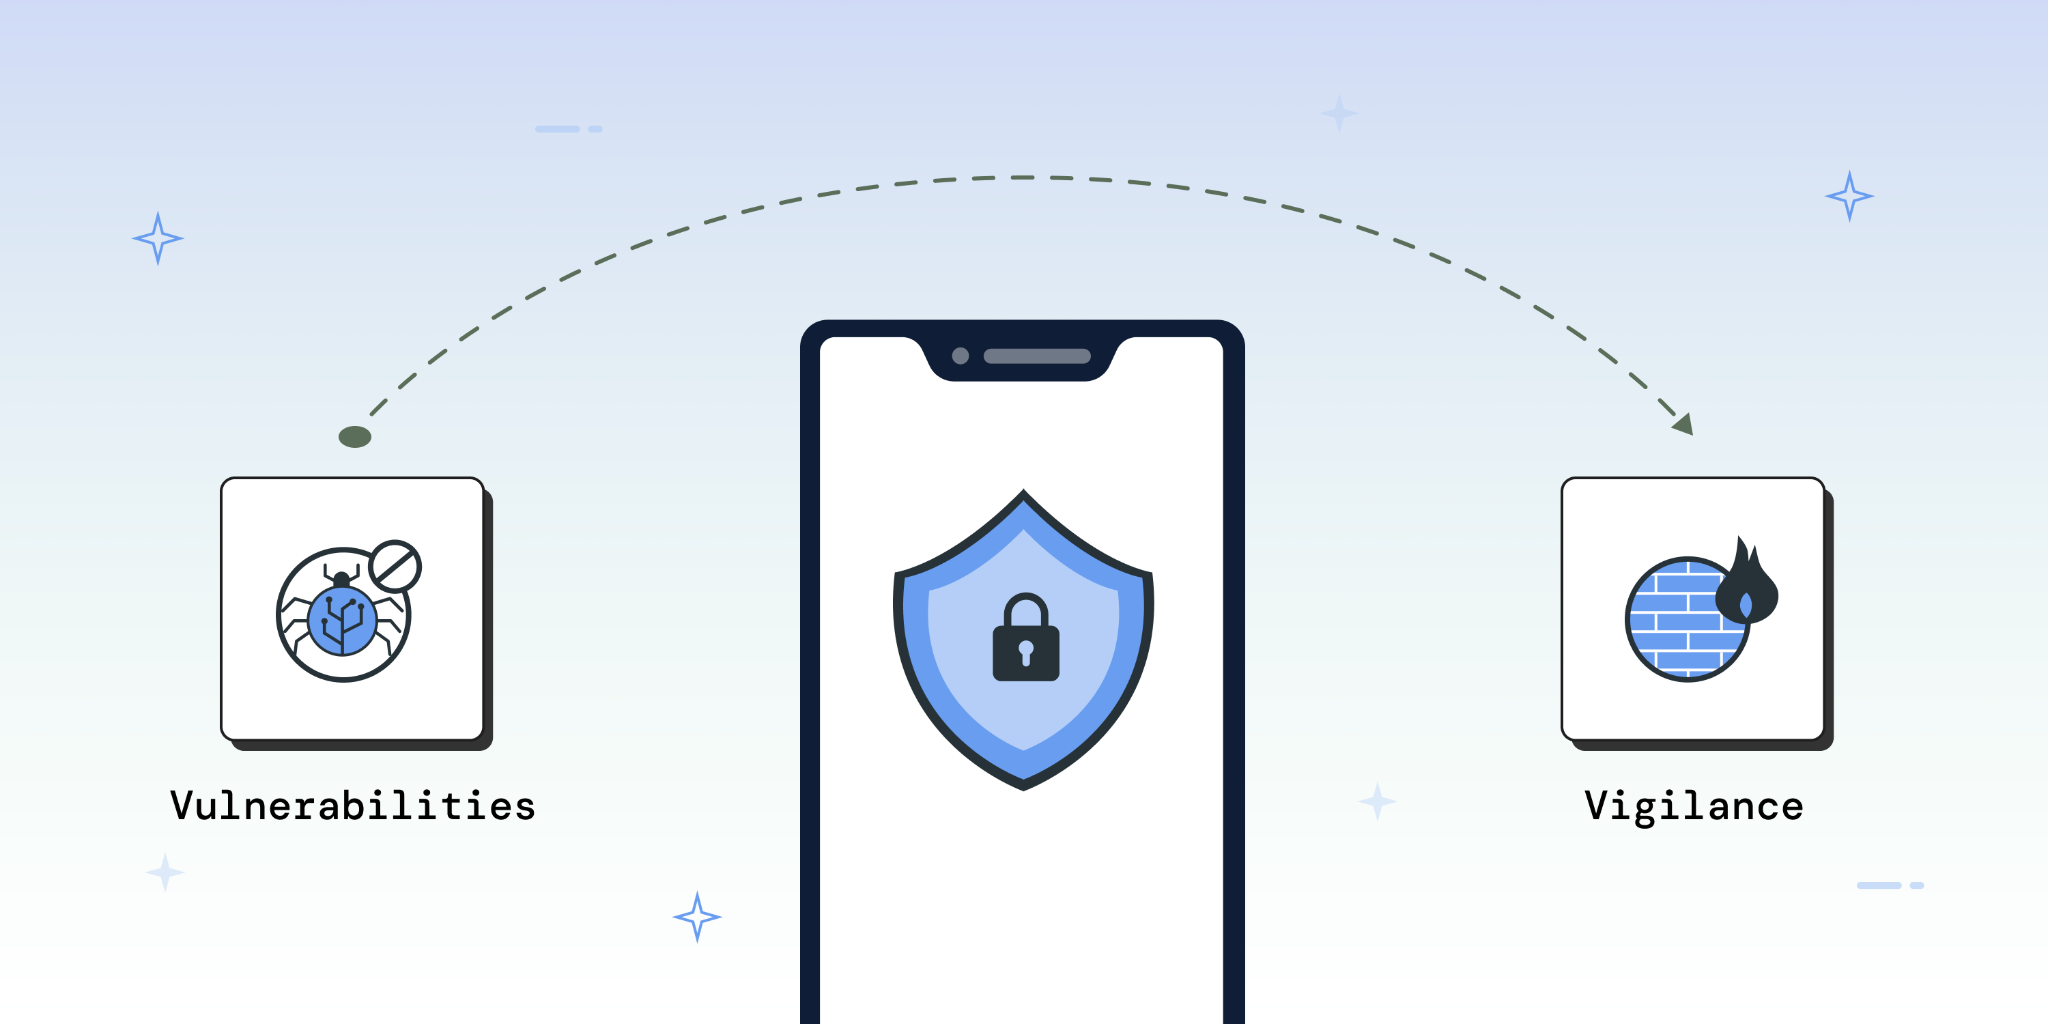 https://www.appknox.com/hubfs/Mobile%20Application%20Security%20%E2%80%93%20%20From%20Vulnerabilities%20to%20Vigilance.png